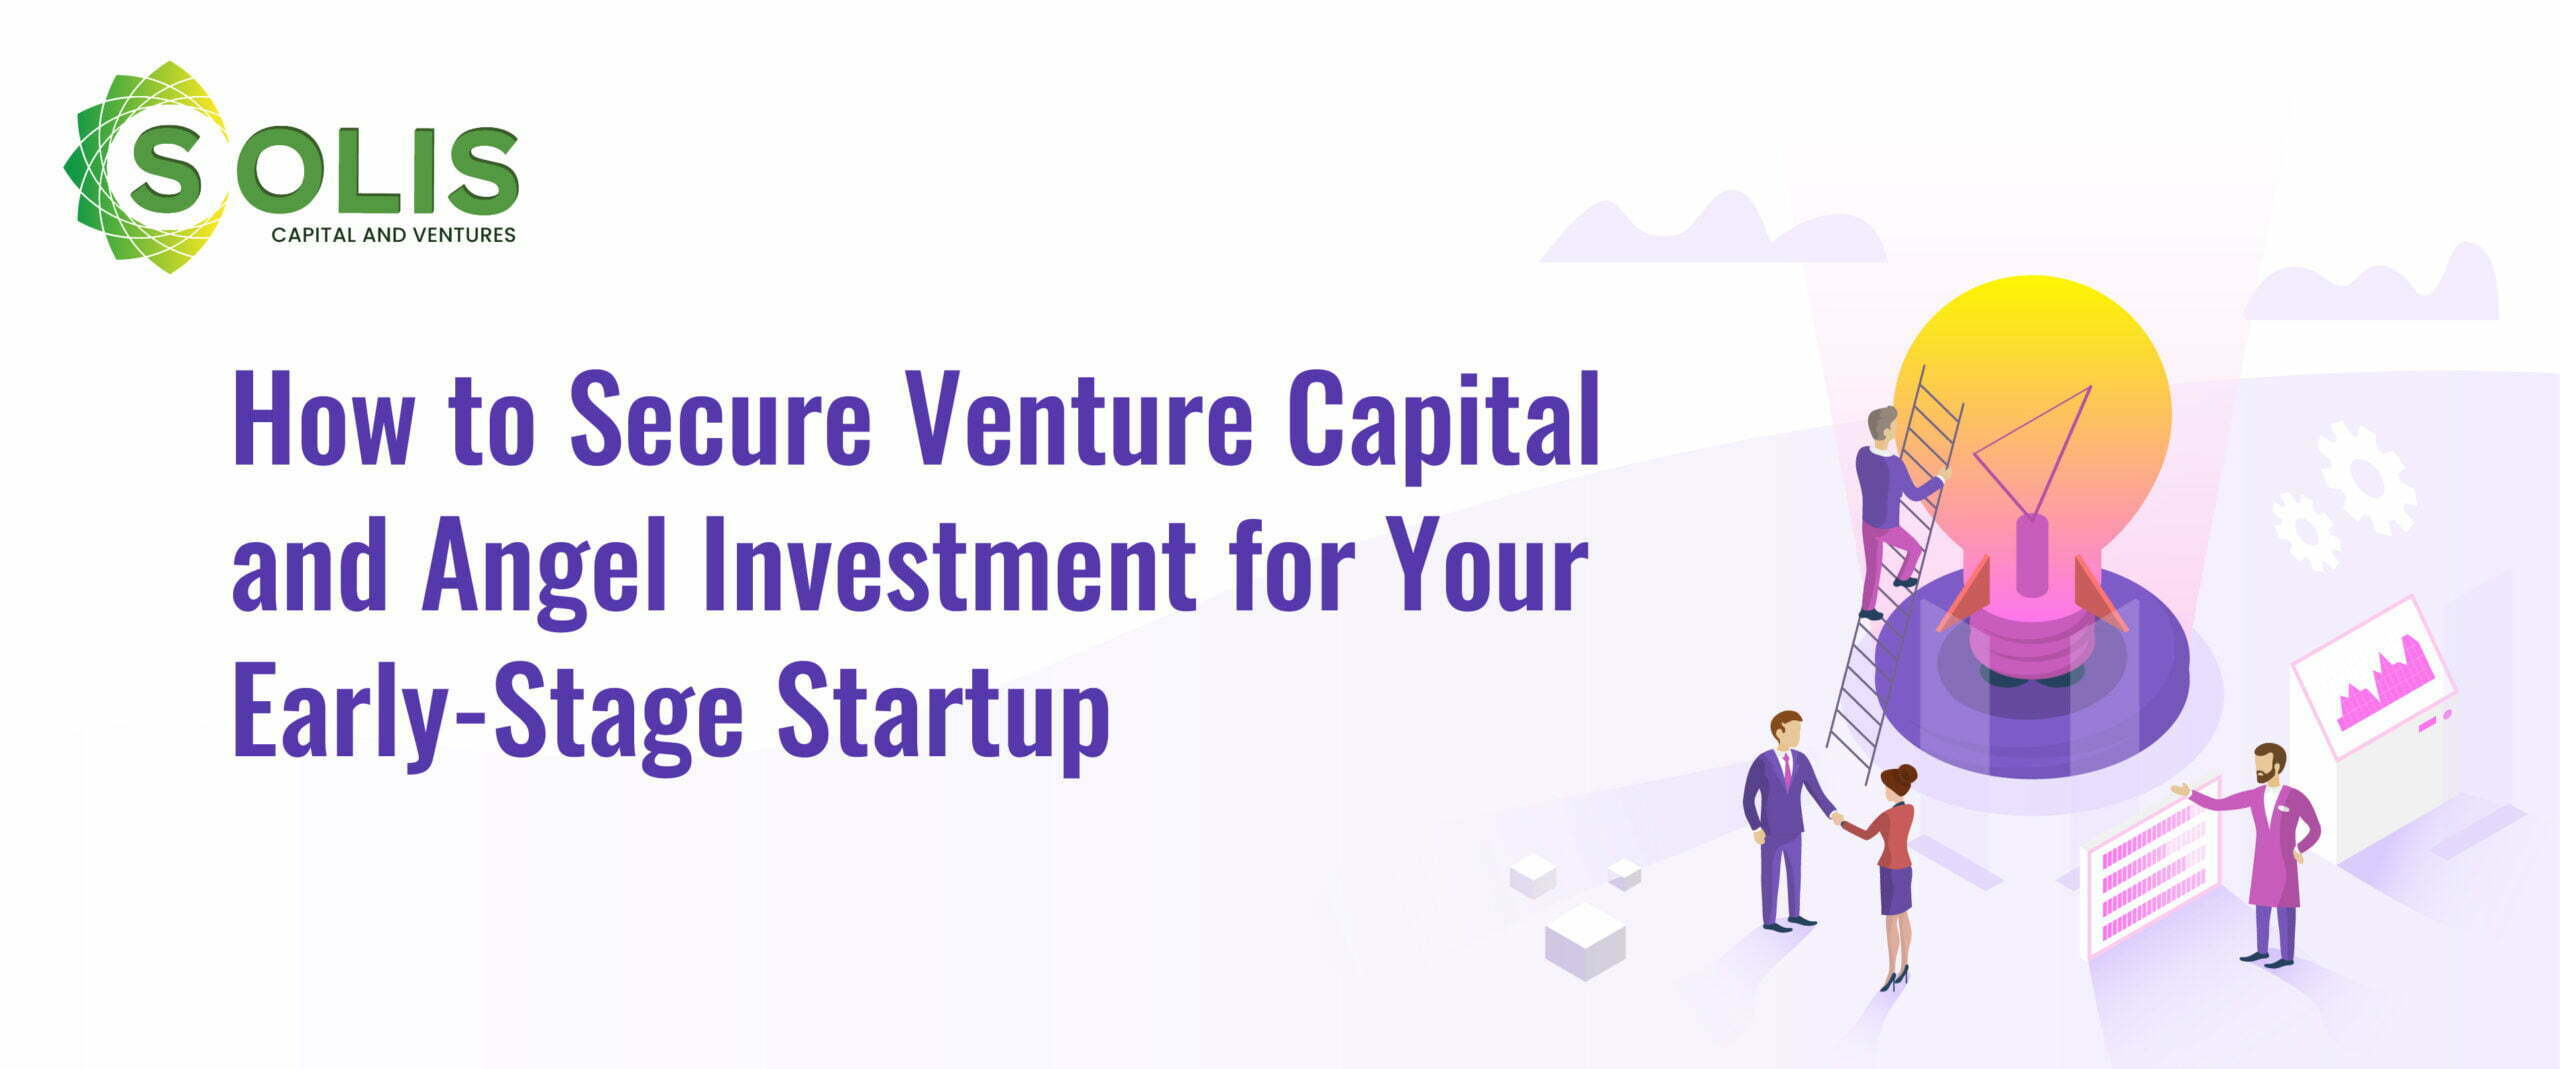 How to Secure Venture Capital and Angel Investment for Your Early-Stage Startup